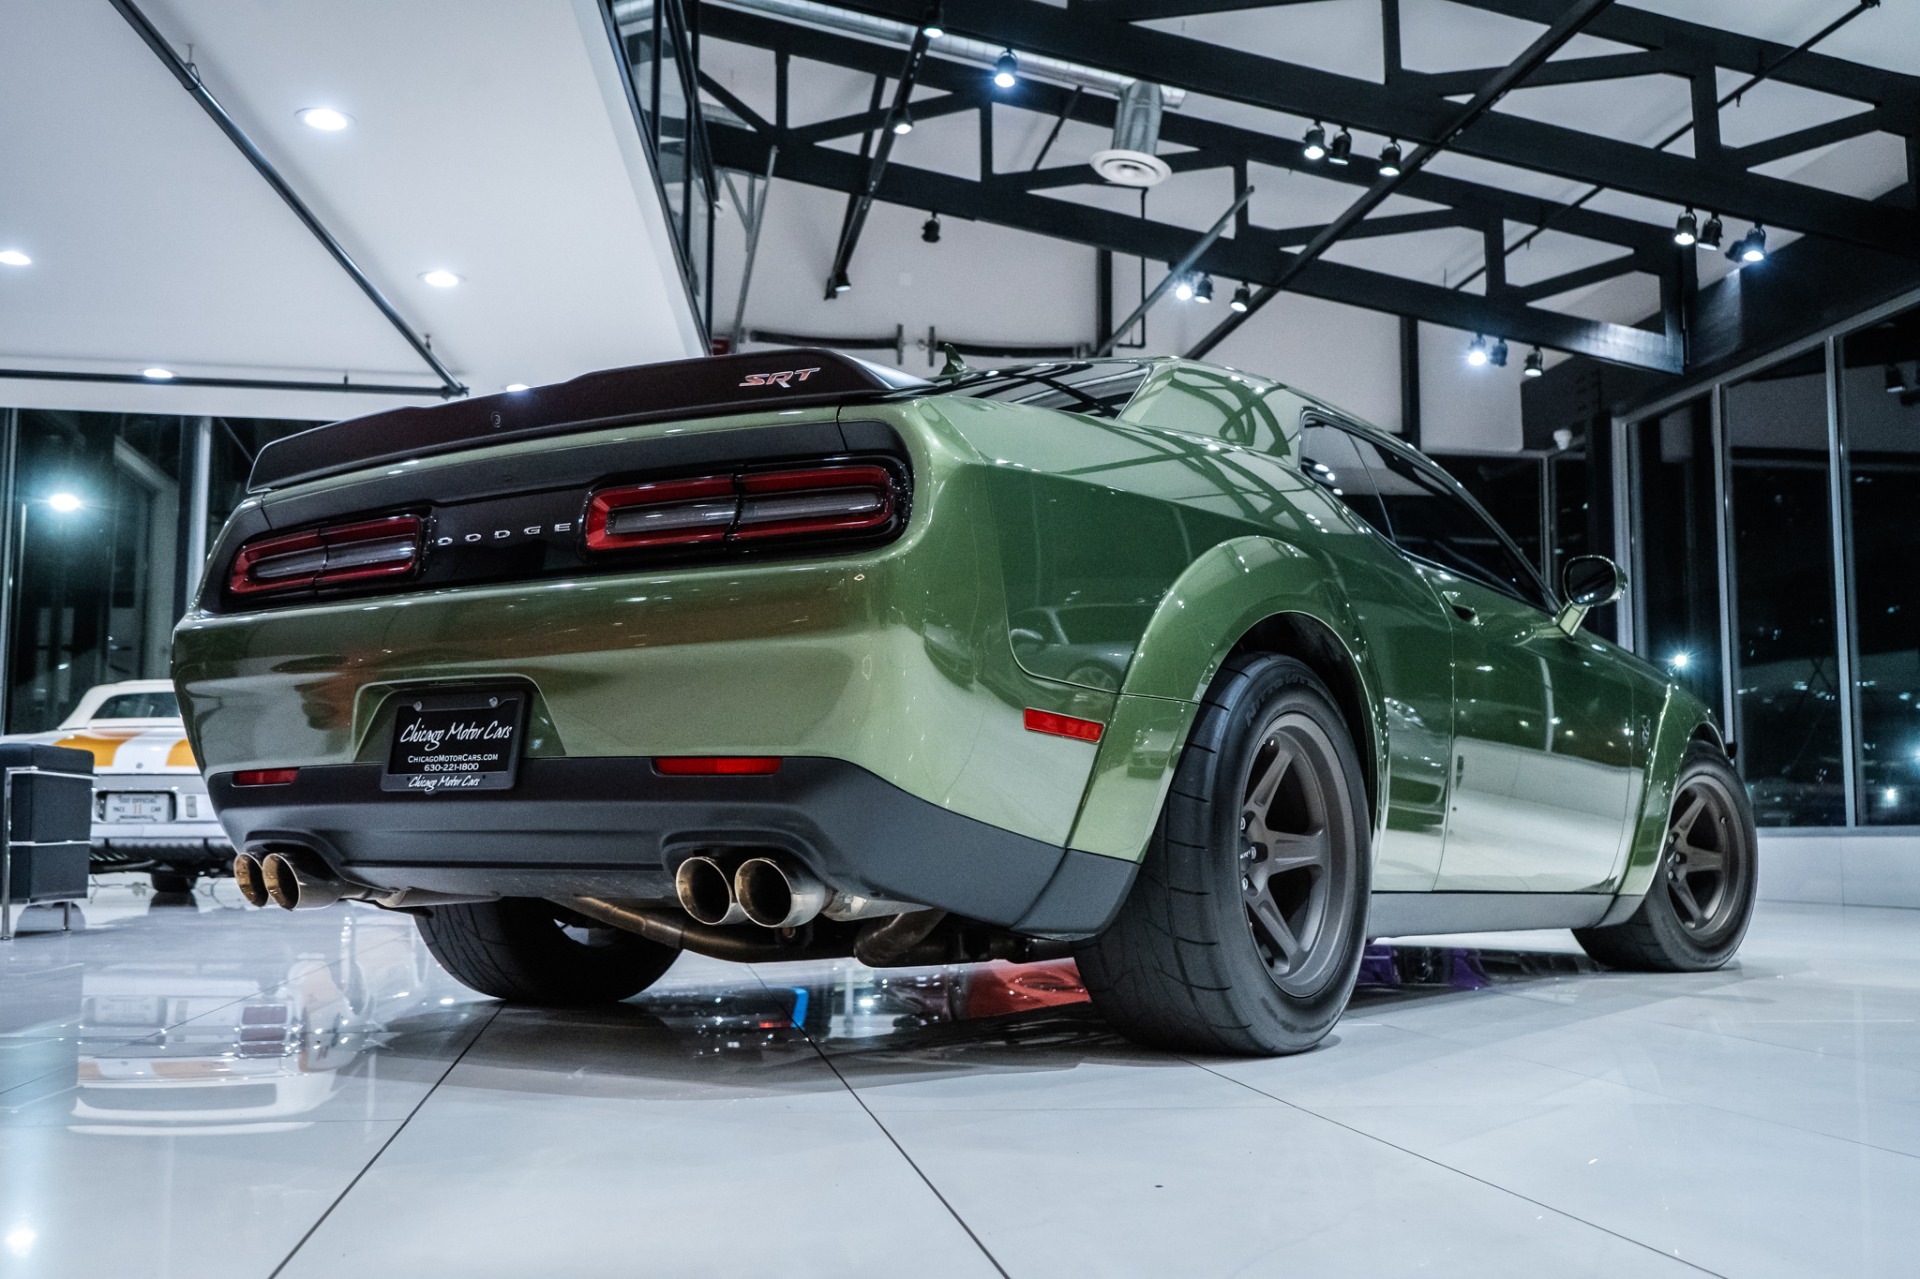 Used-2018-Dodge-Challenger-SRT-Demon-1-of-2-in-F8-Green-wBrass-Monkey-Wheels-FORZA-Stage-4R-1100HP